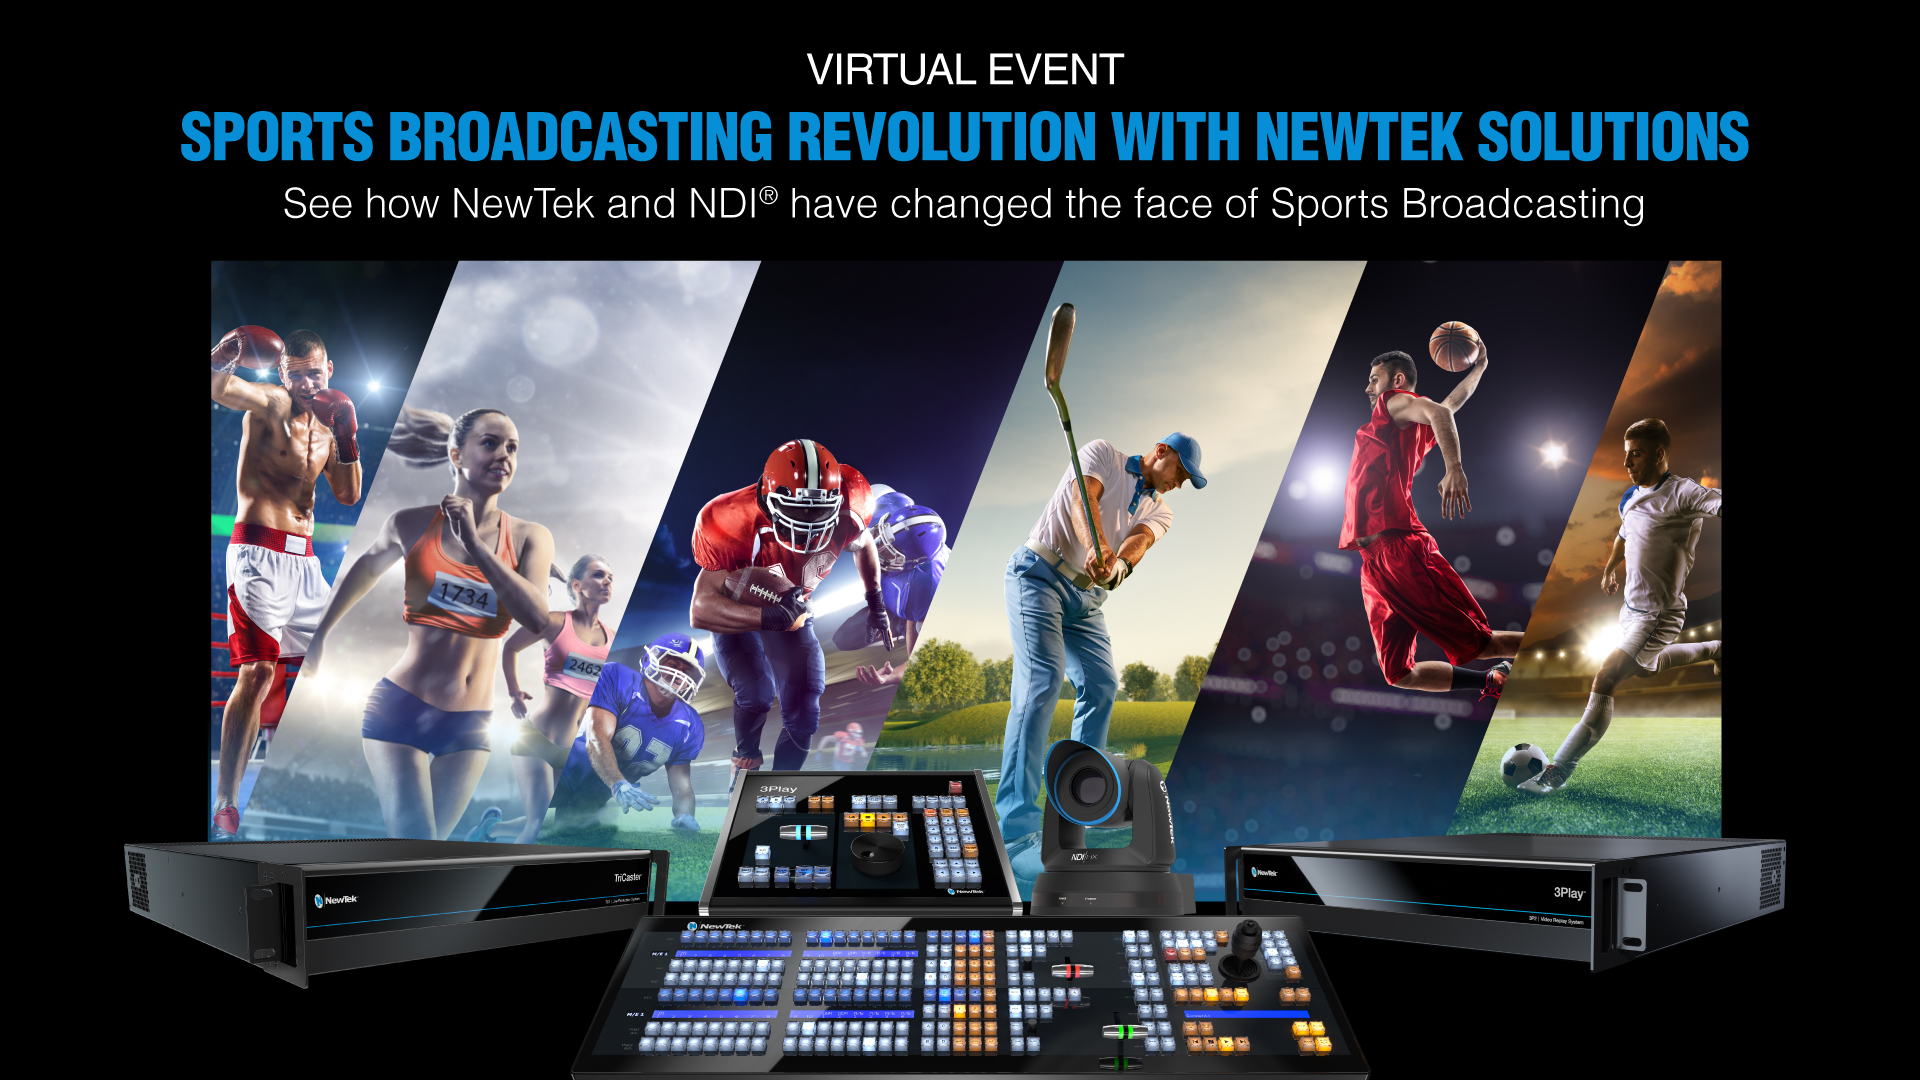  Virtual Event: Sports Broadcasting Revolution with NewTek Solutions